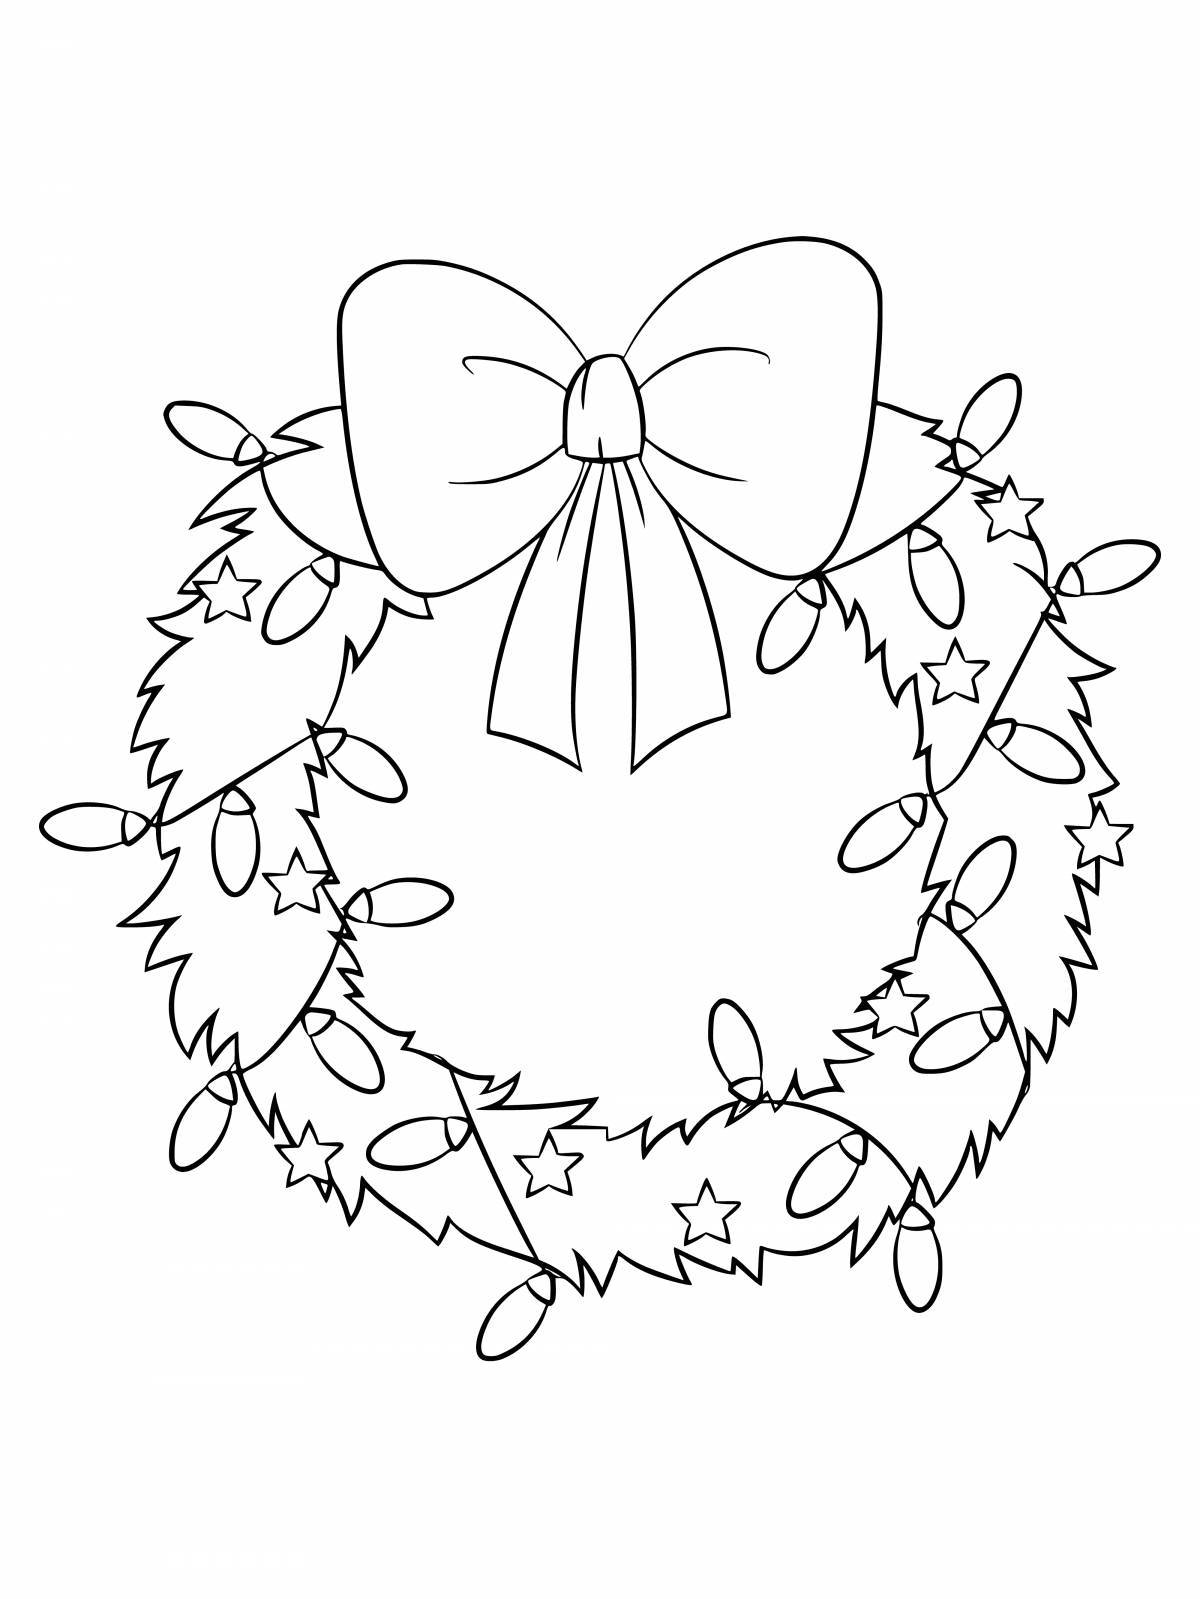 Colorful Christmas wreath coloring page